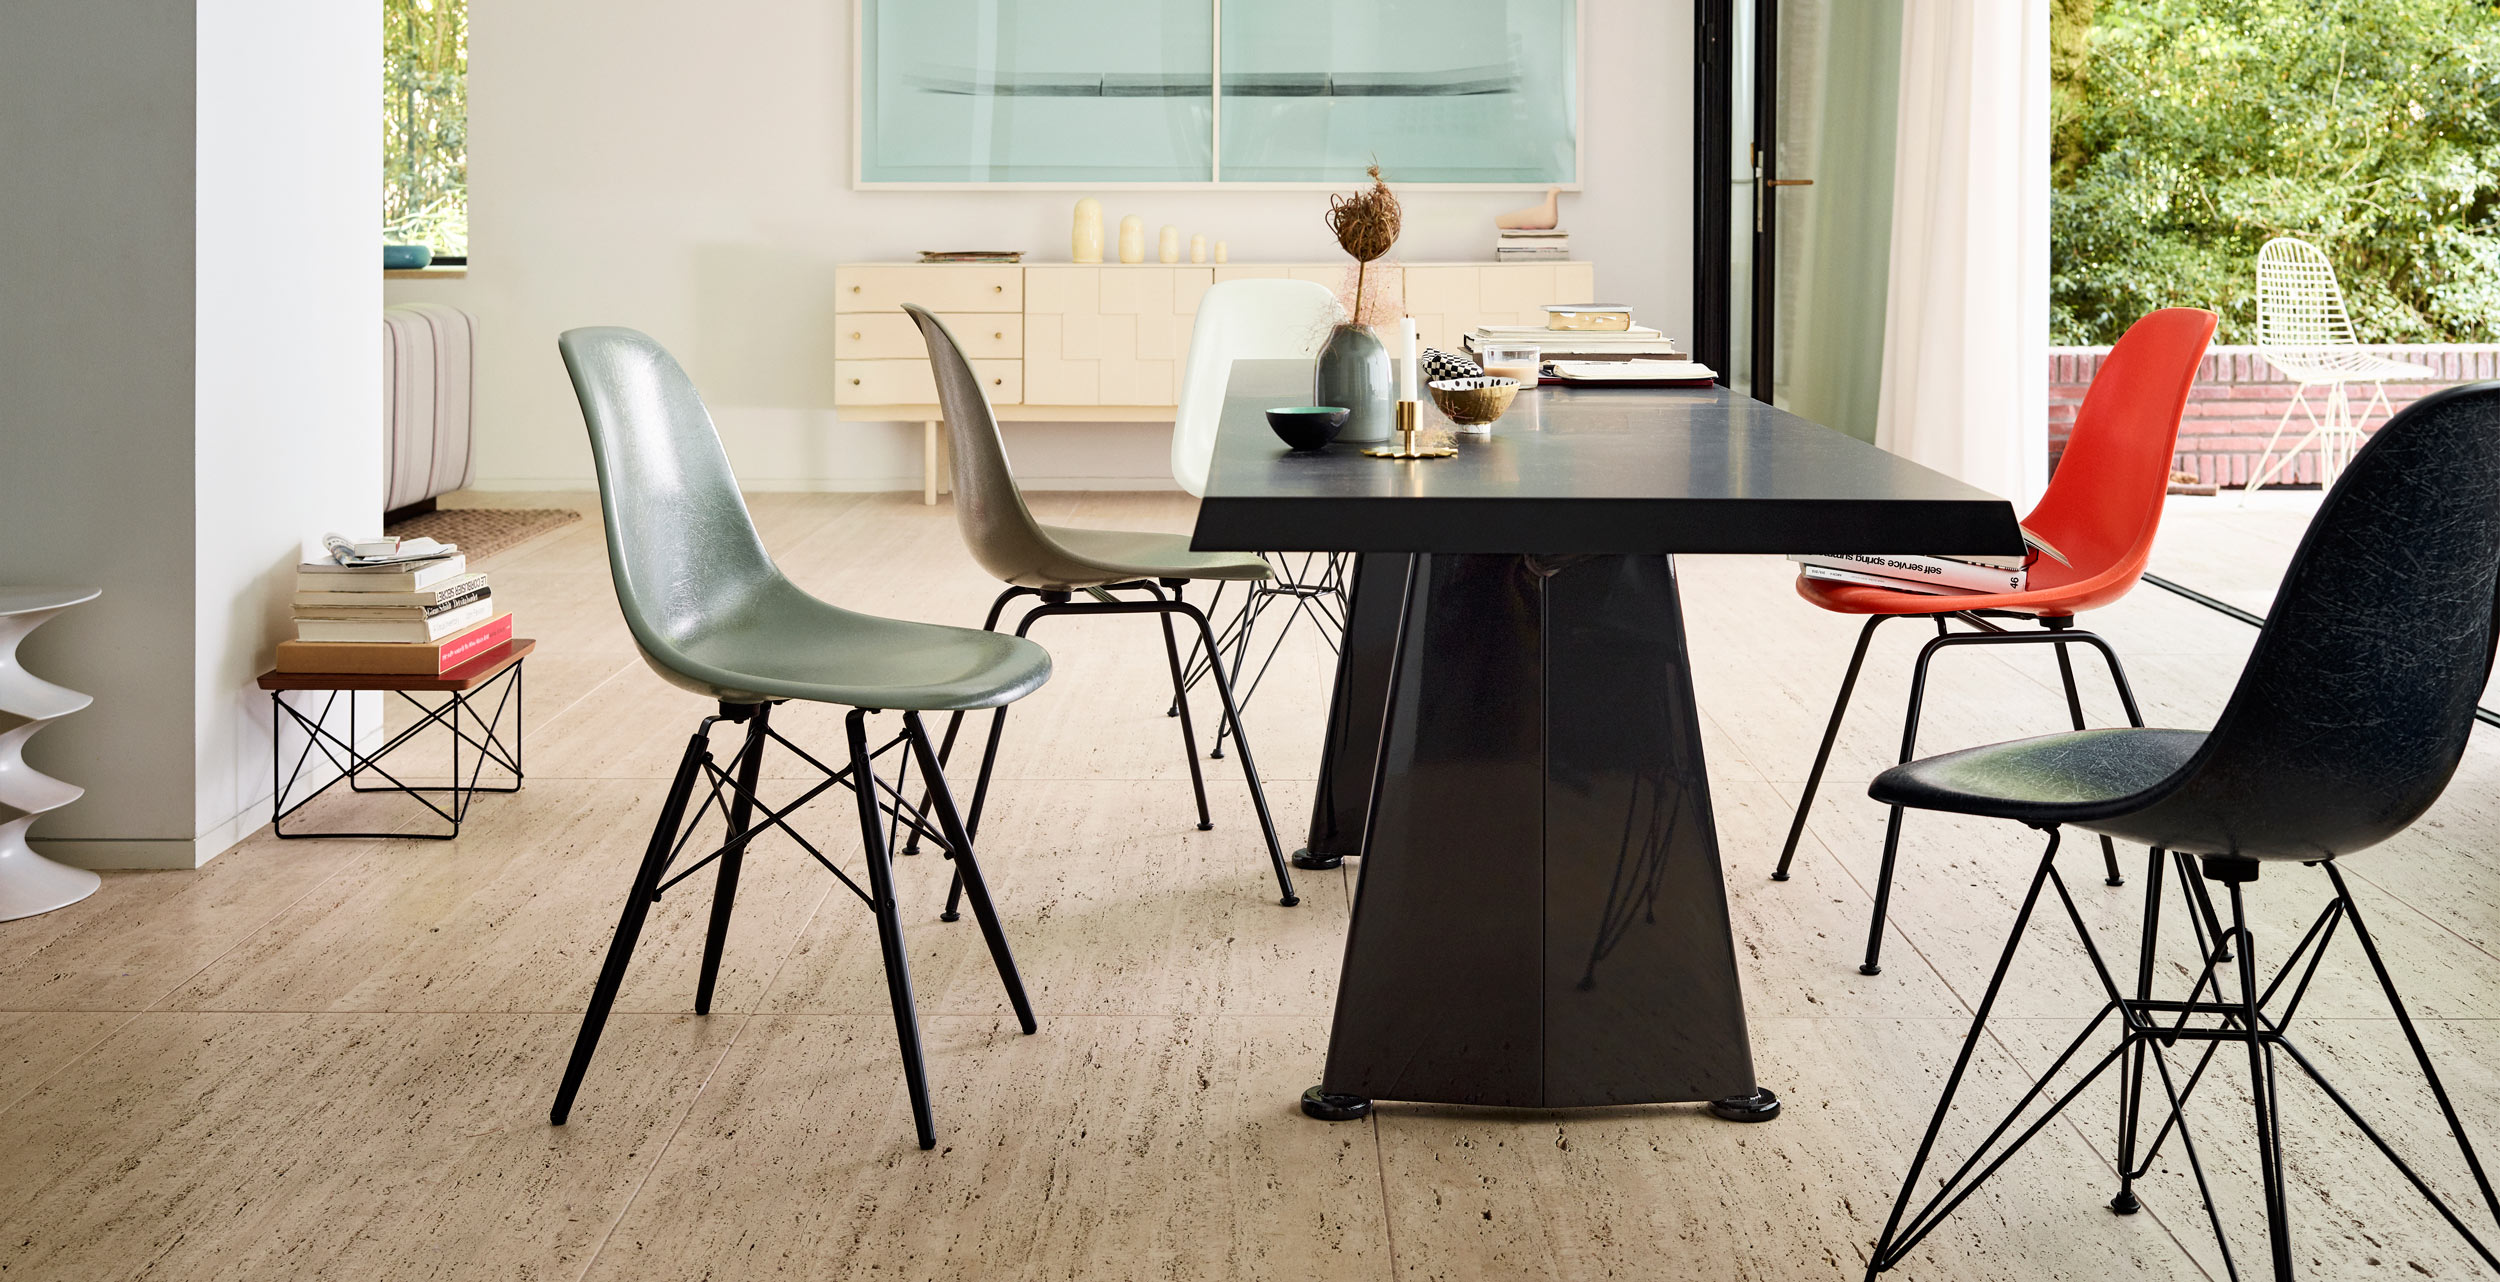 Vitra Eames Fiberglass Chairs with Trapeze Table